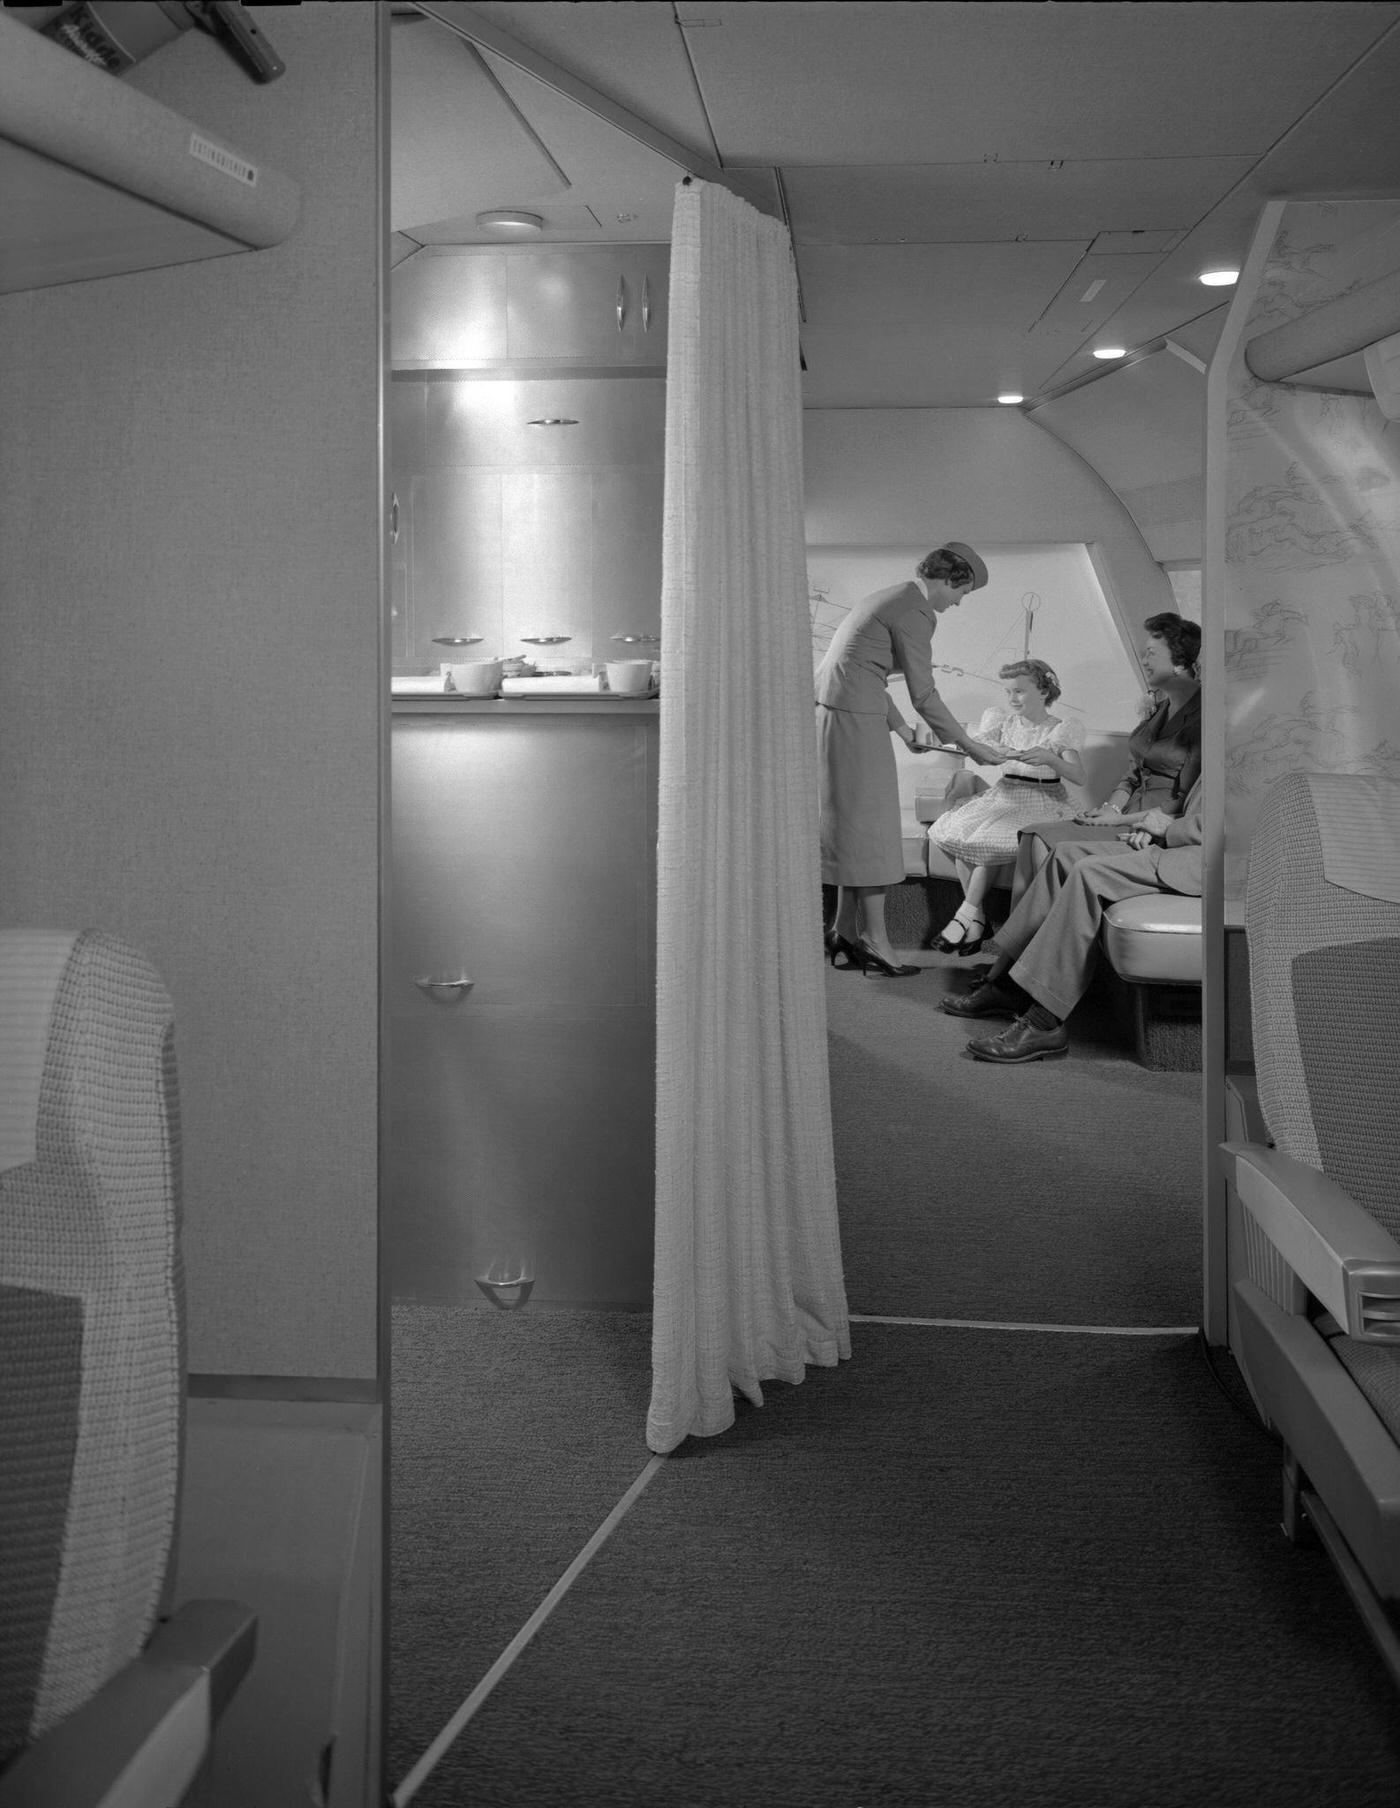 Passengers are treated to excellent service on a Transocean Air Lines Boeing 377 Stratocruiser flight in the mid 1950s as an air hostess serves refreshments in the observation area. Transocean Air Lines was a pioneering discount airline that operated between 1946 and 1962.